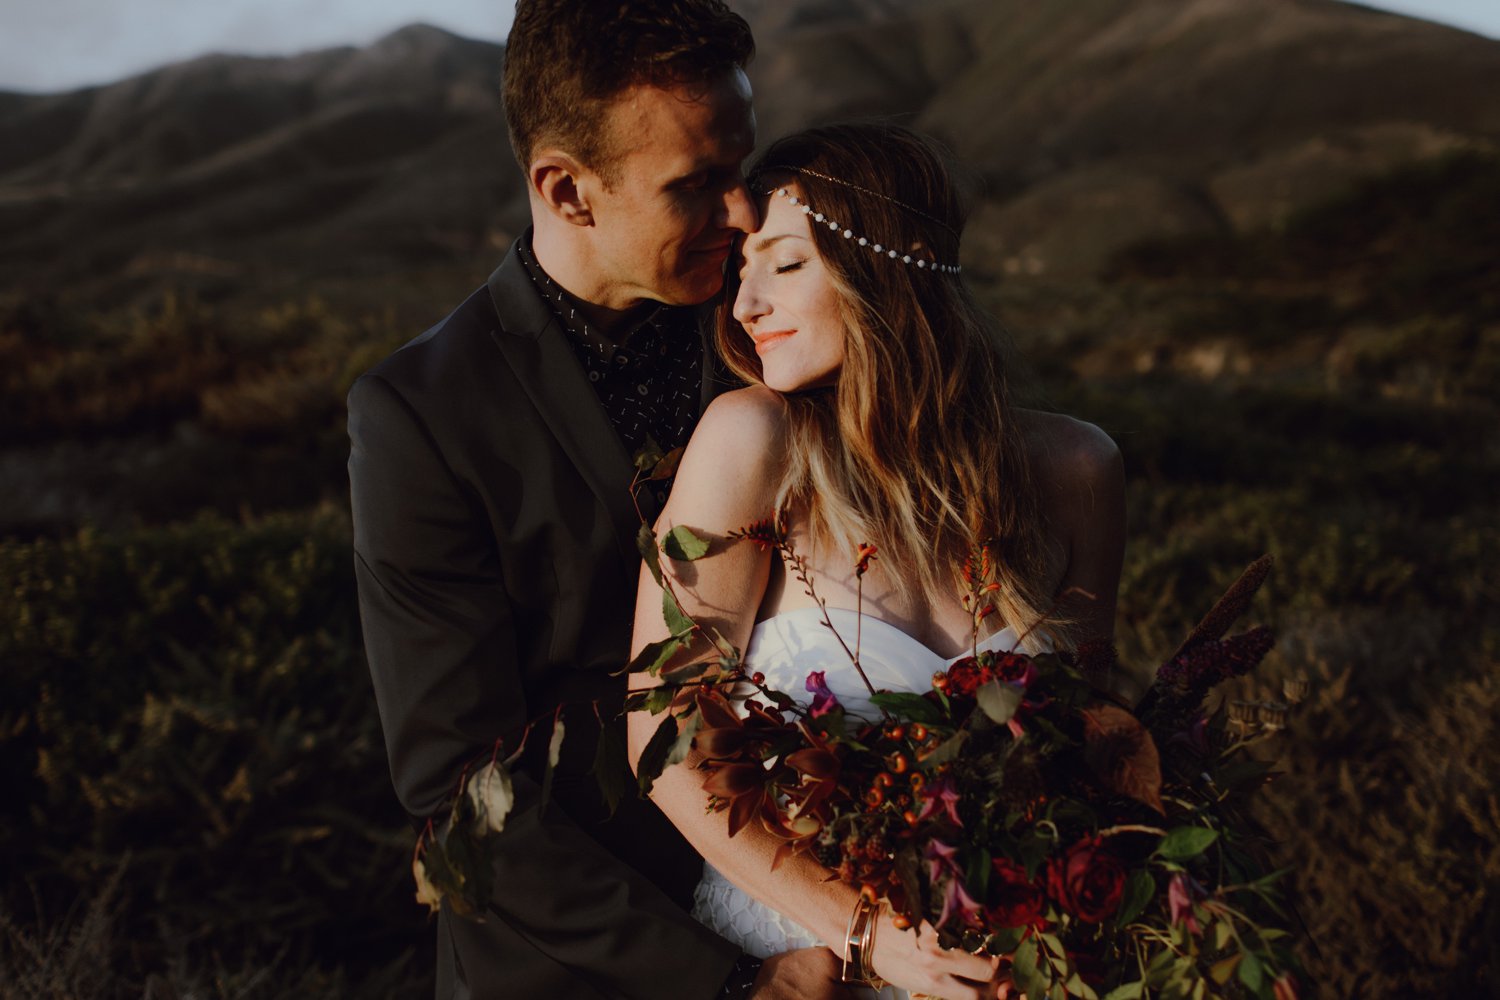 A wedding portrait by Catalina Jean Photography